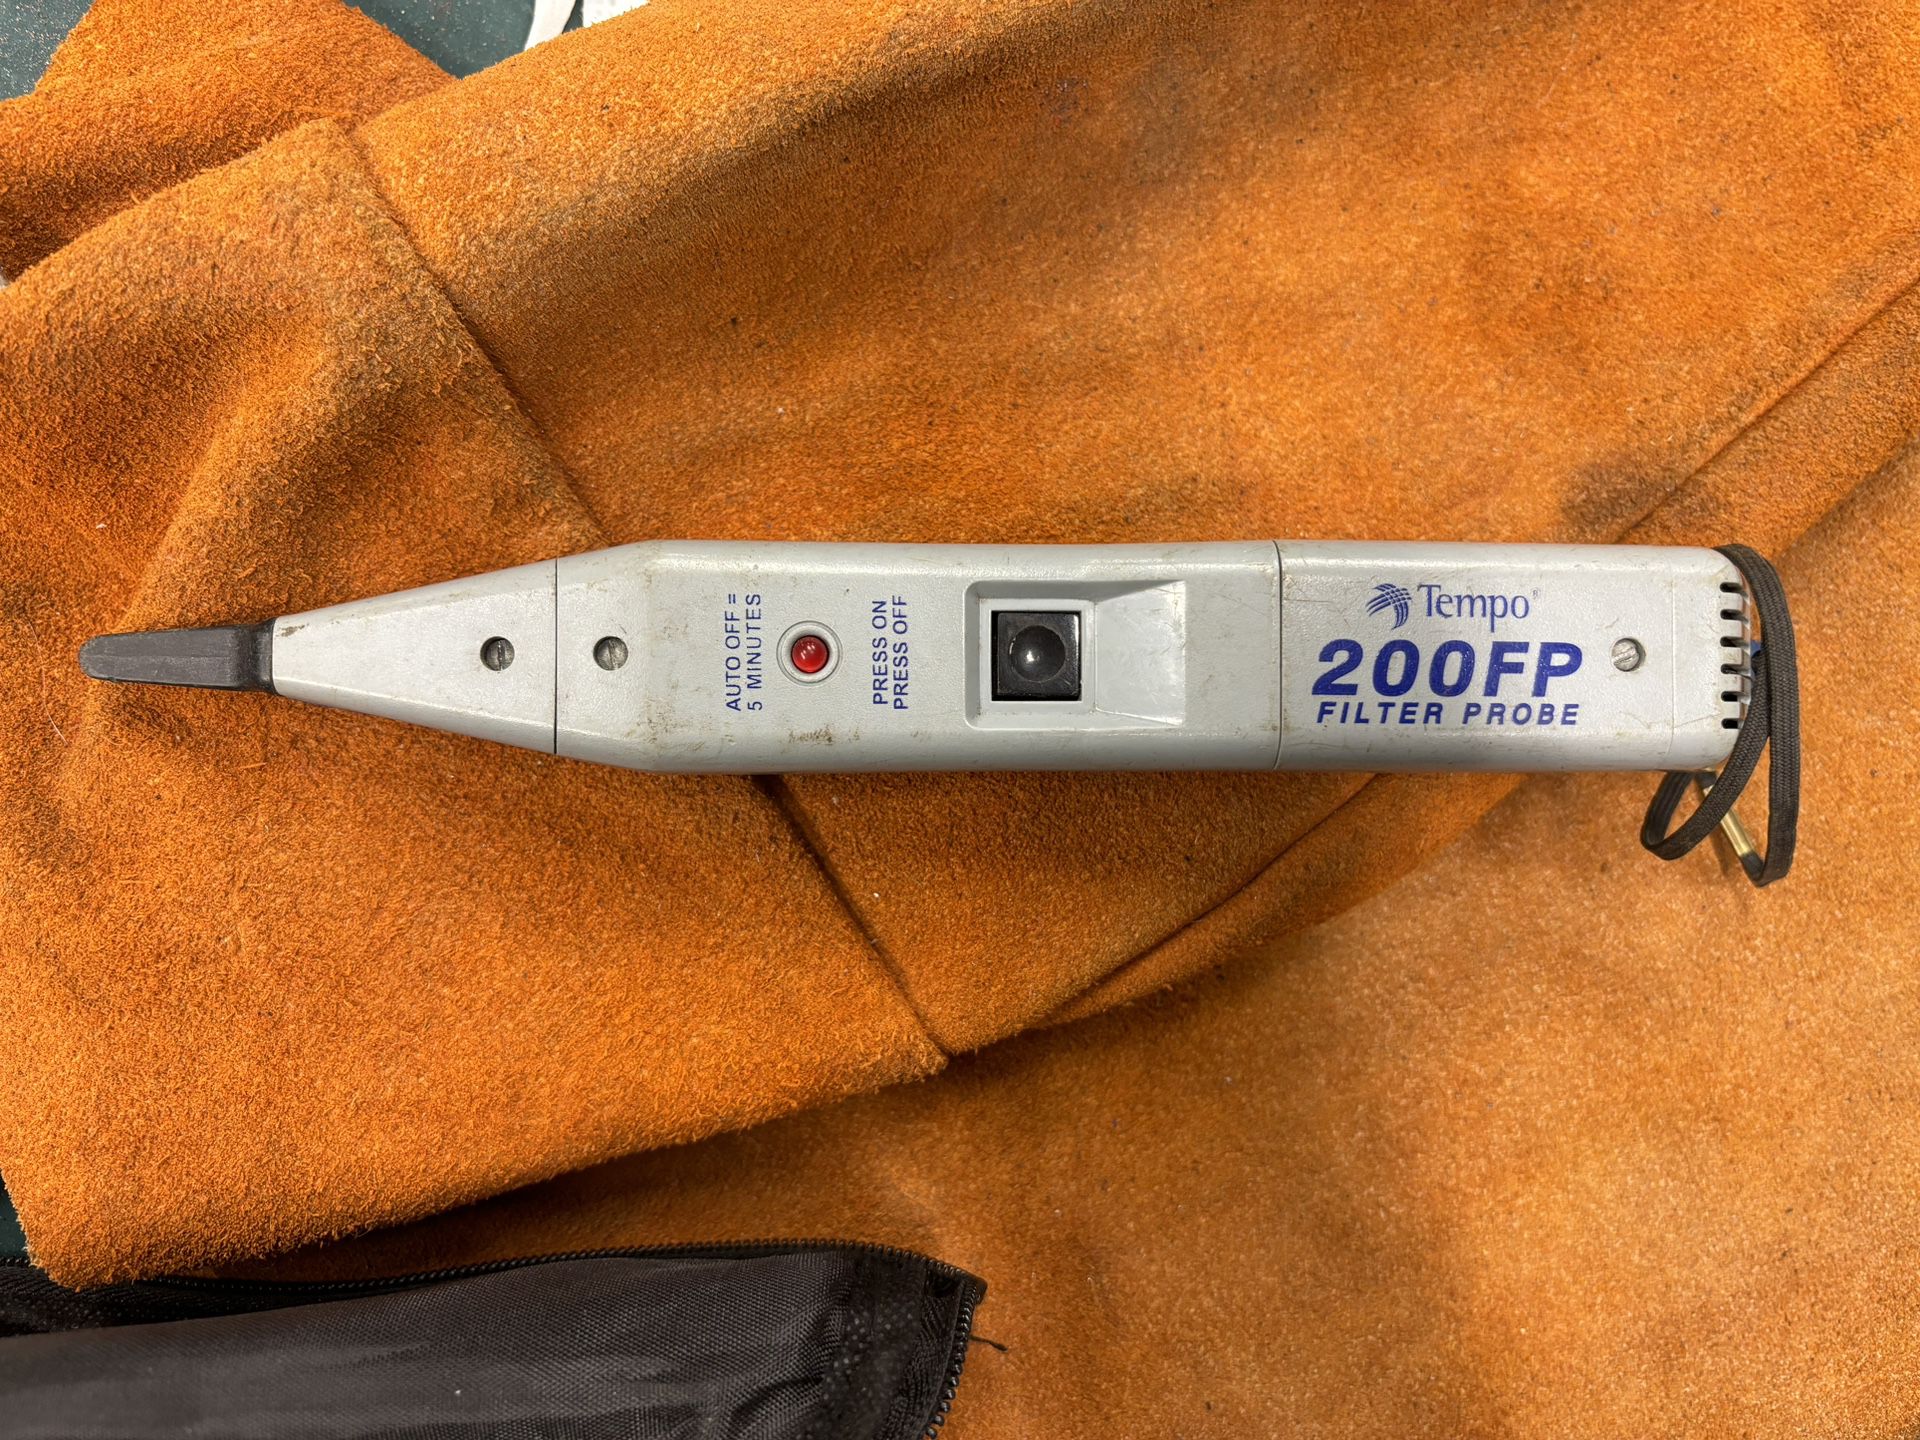 Tempo 200 FP filter Probe Tool Works